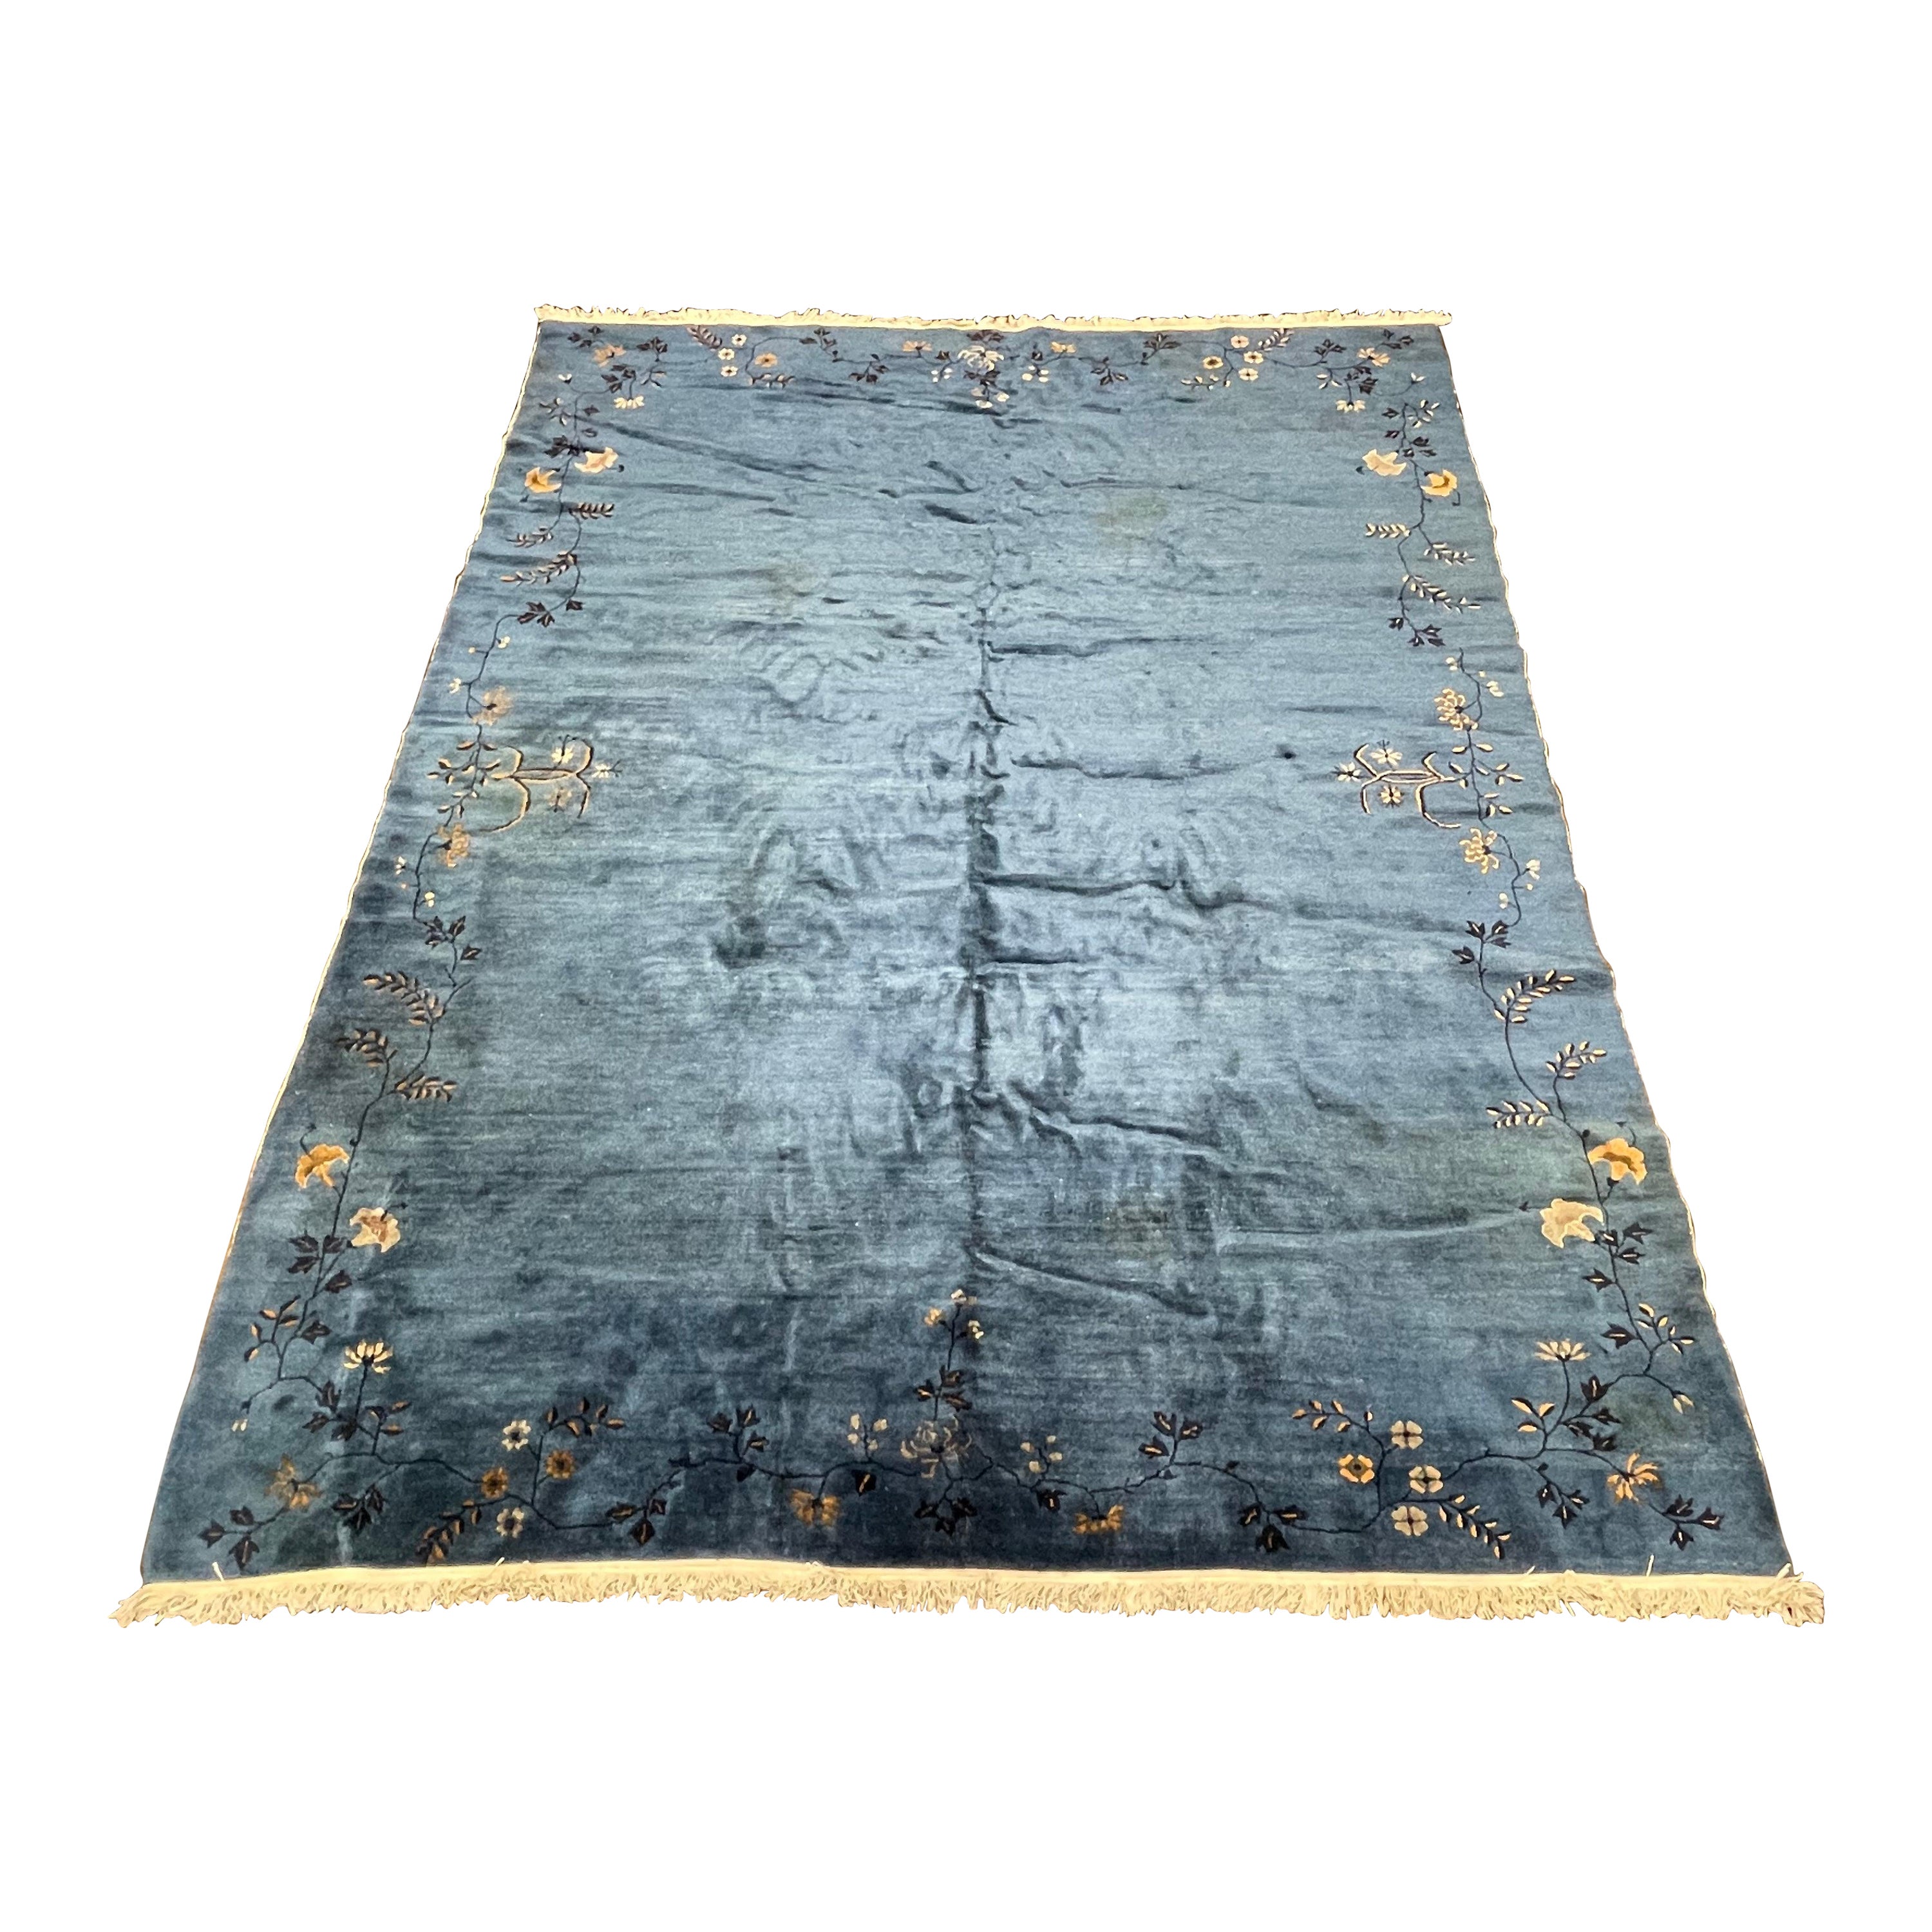 Antique Chinese Art Deco Rug, Circa 1920 For Sale